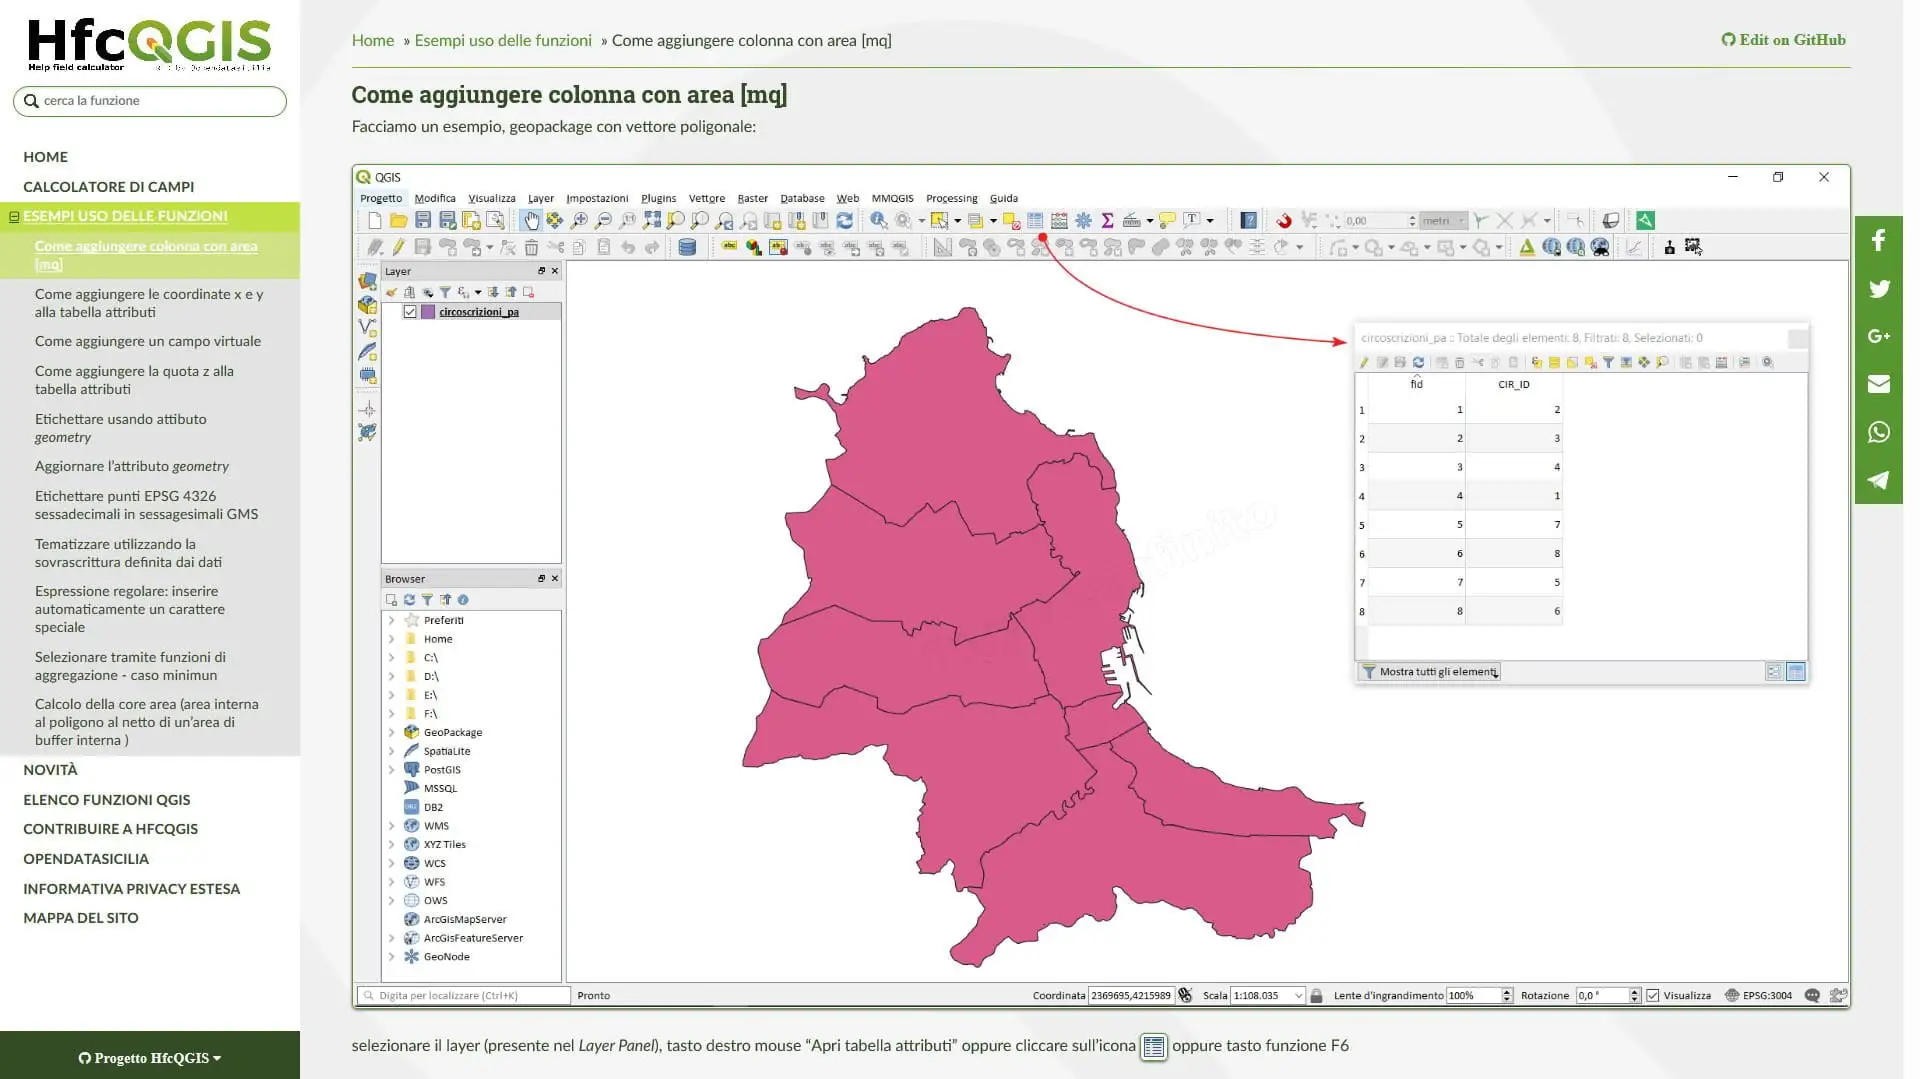 HfcQGIS in Read the Docs (RTD) by @OpendataSicilia